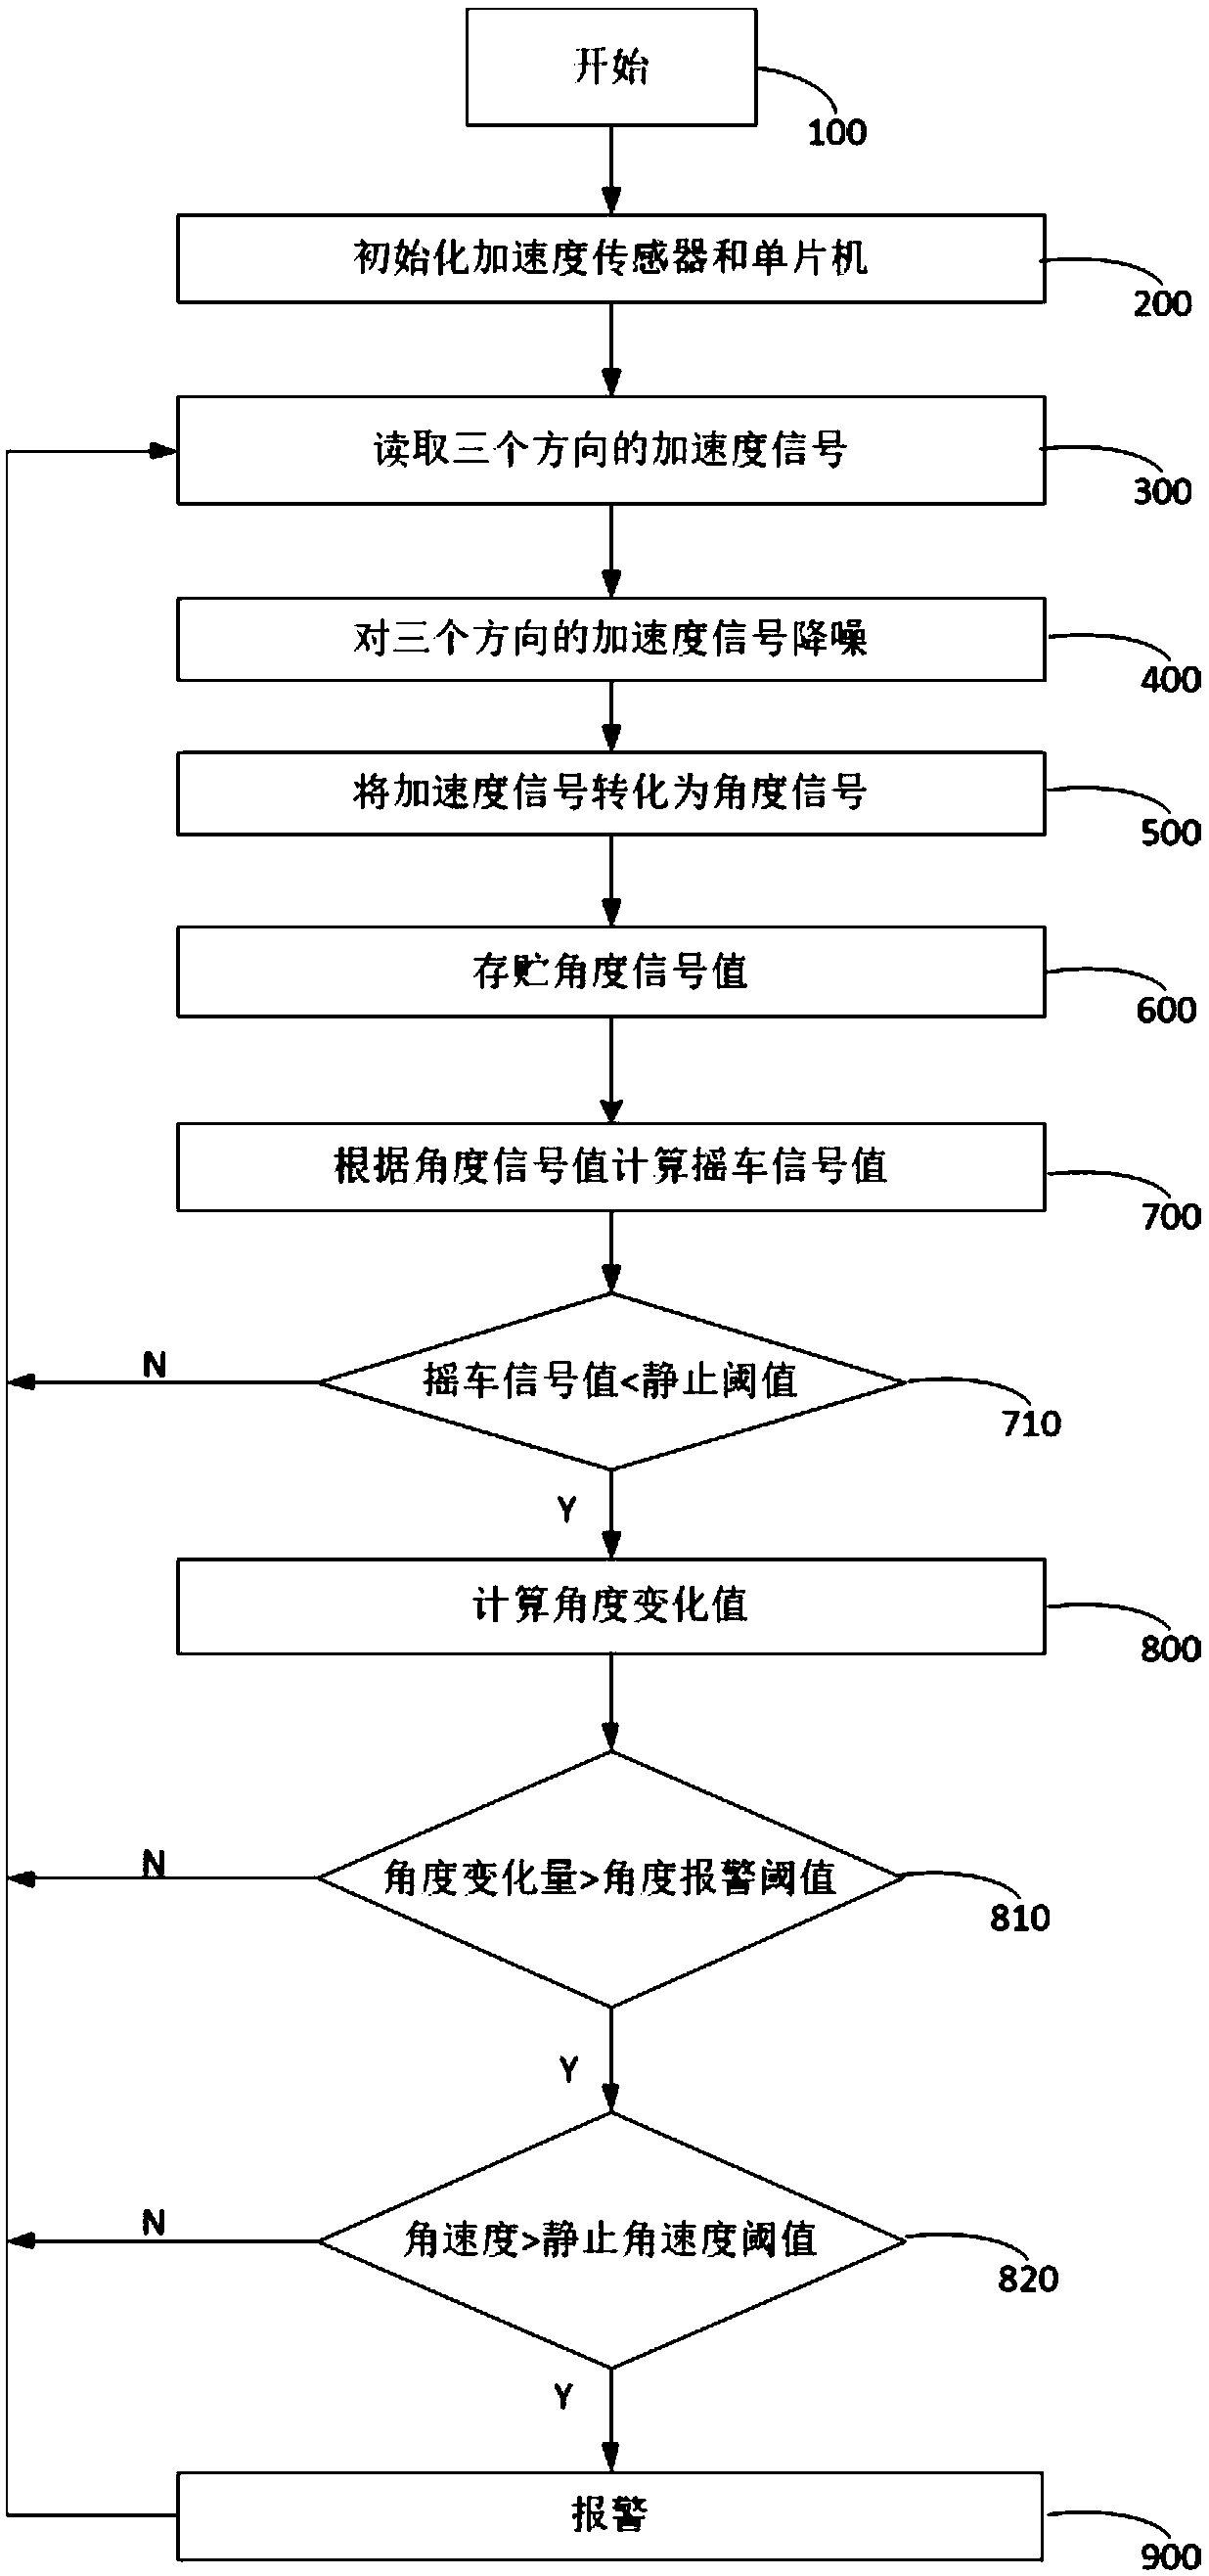 Method and device for anti-theft detection of automobile wheels